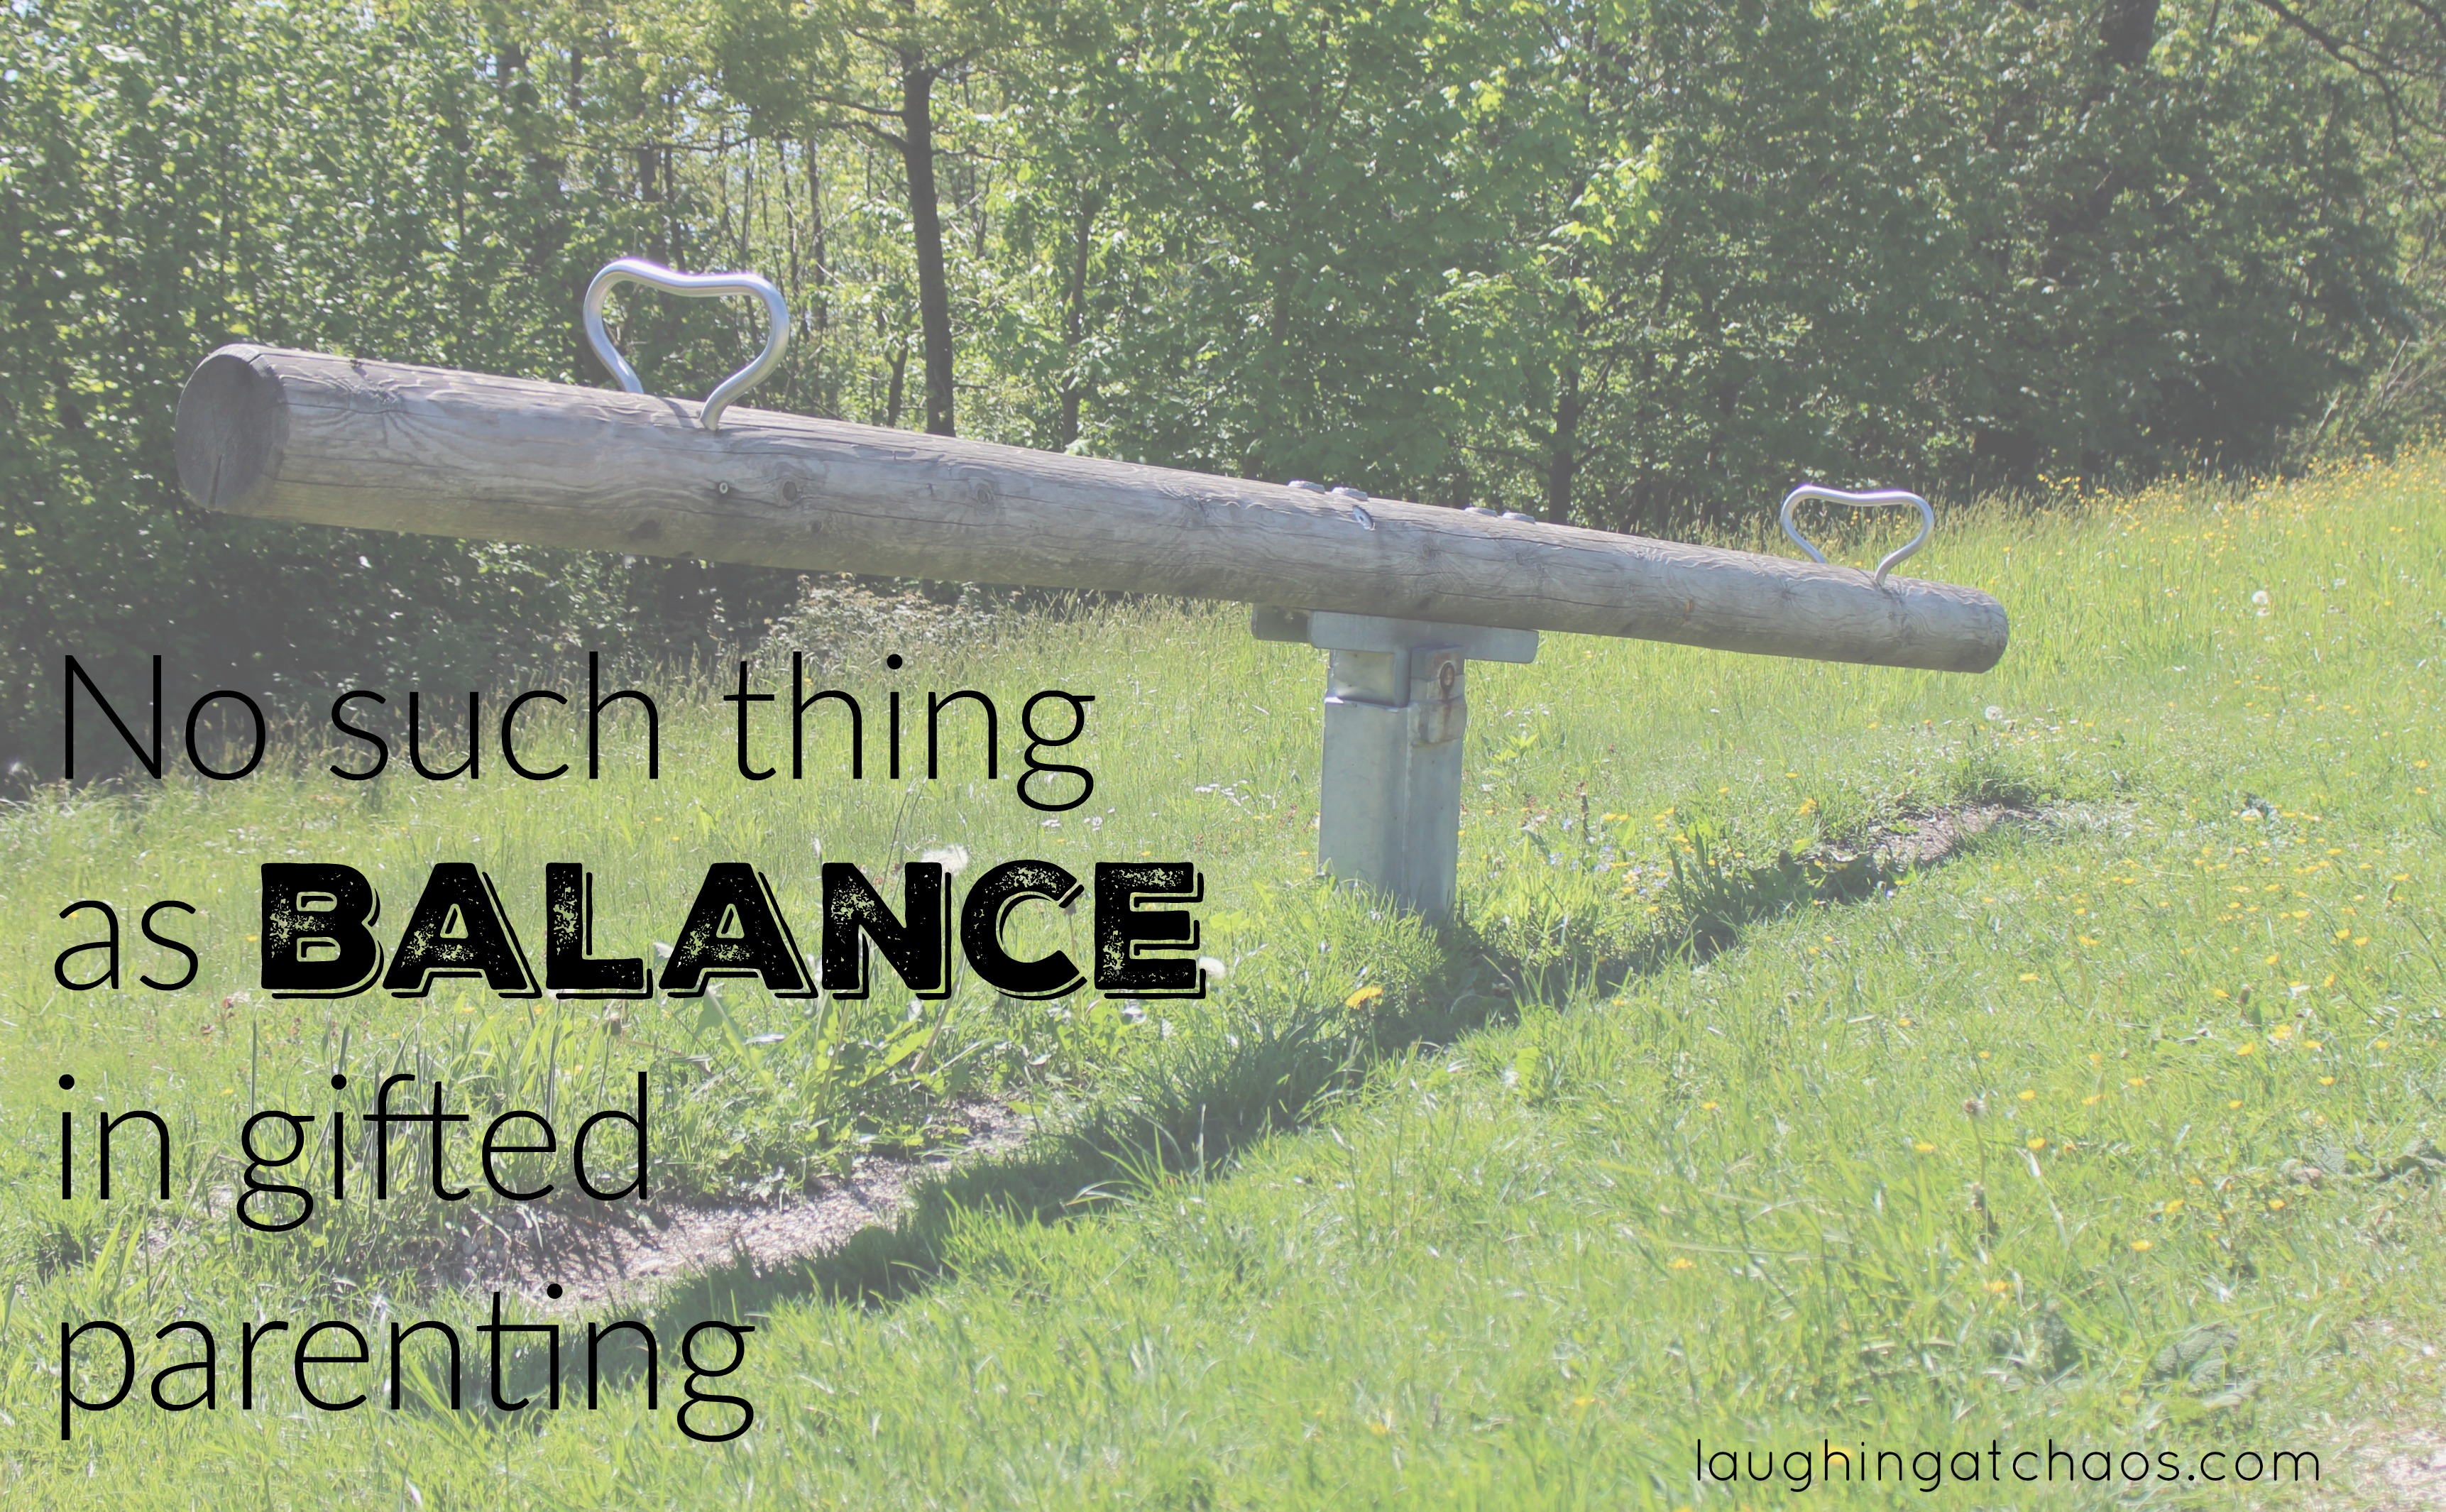 No such thing as balance in gifted parenting